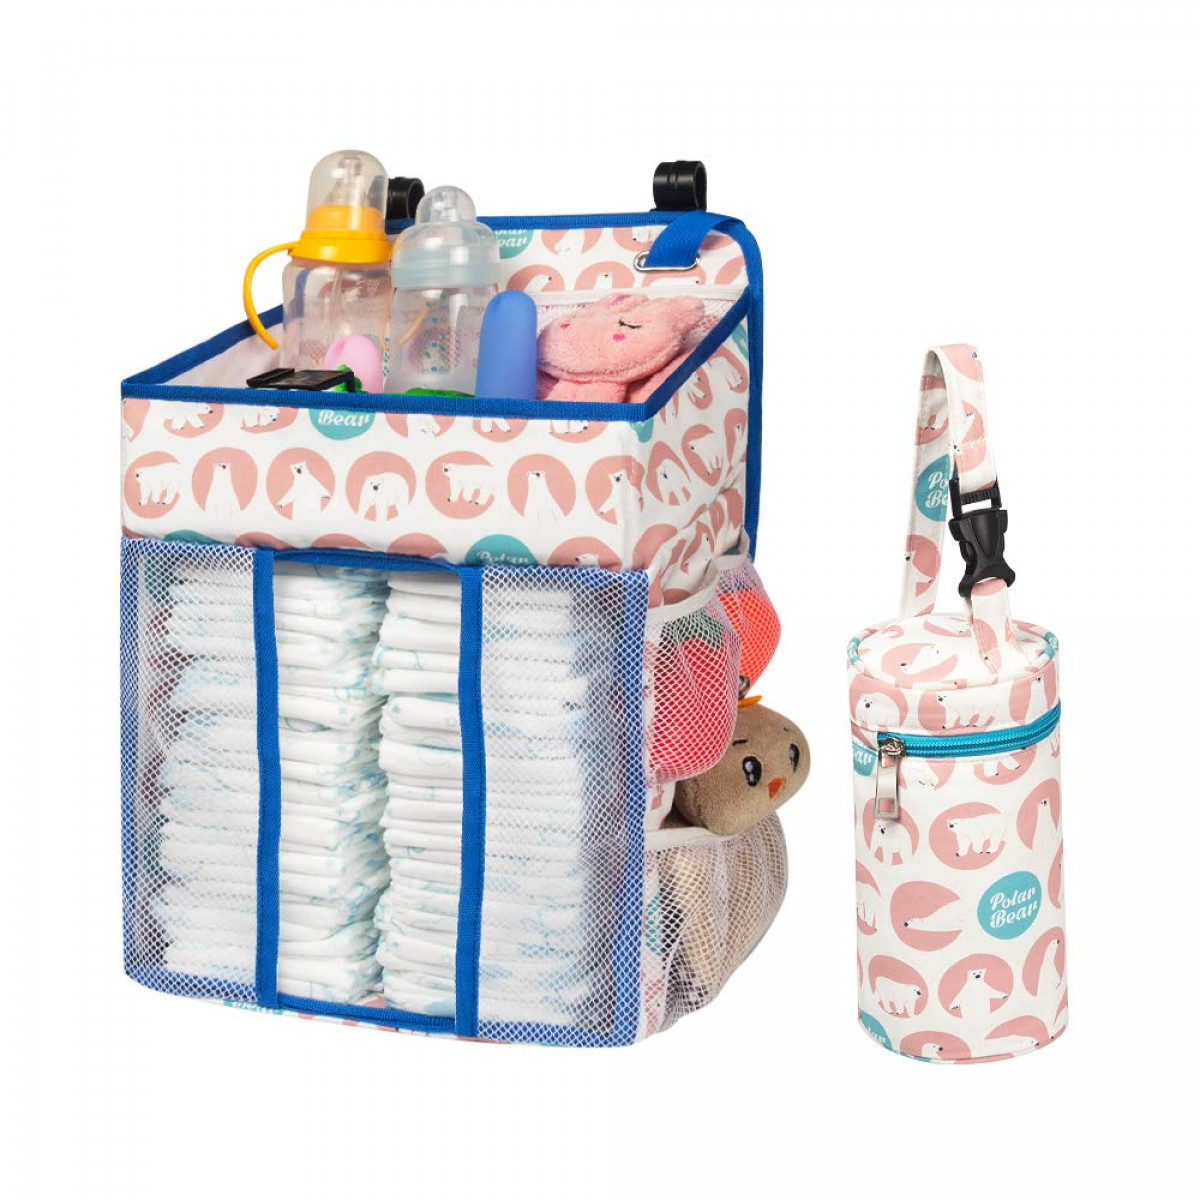 Nursery Organization & Baby Shower Gifts for Newborn Selbor Diaper Caddy Organizer Playard or Wall Crib Hanging Diaper Stacker Storage Bag for Changing Table 